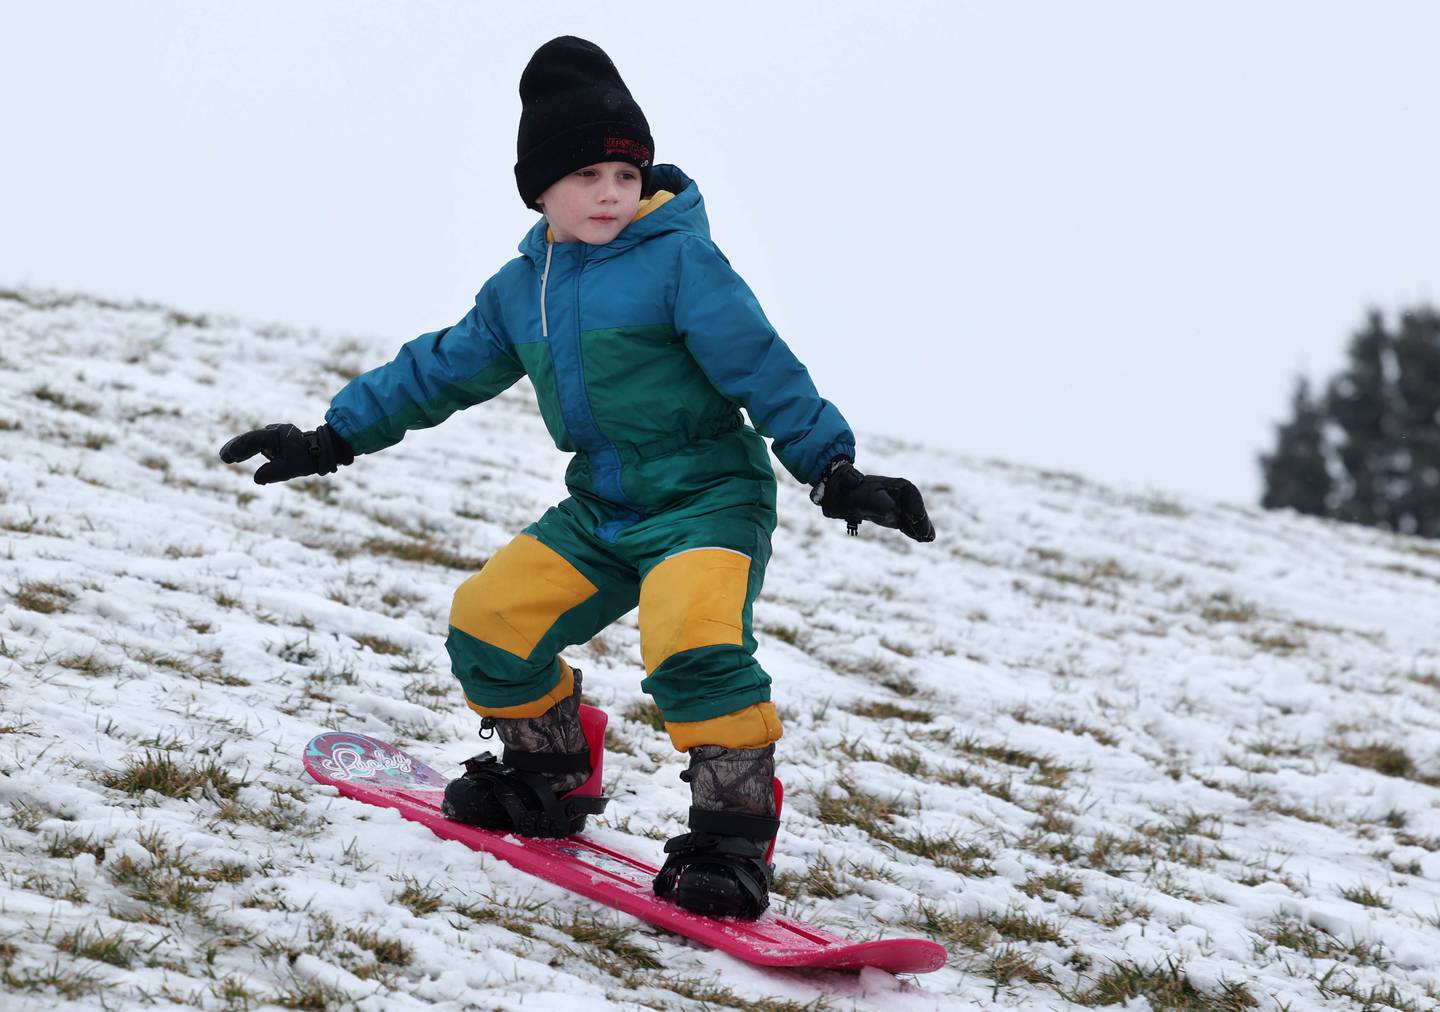 Alonzo Galvin, 5, from Cortland, takes advantage of the snowfall as he snowboards down the Northwestern Medicine Sled Hill Saturday, Jan. 6, 2023, near the Sycamore Park District Community Center.